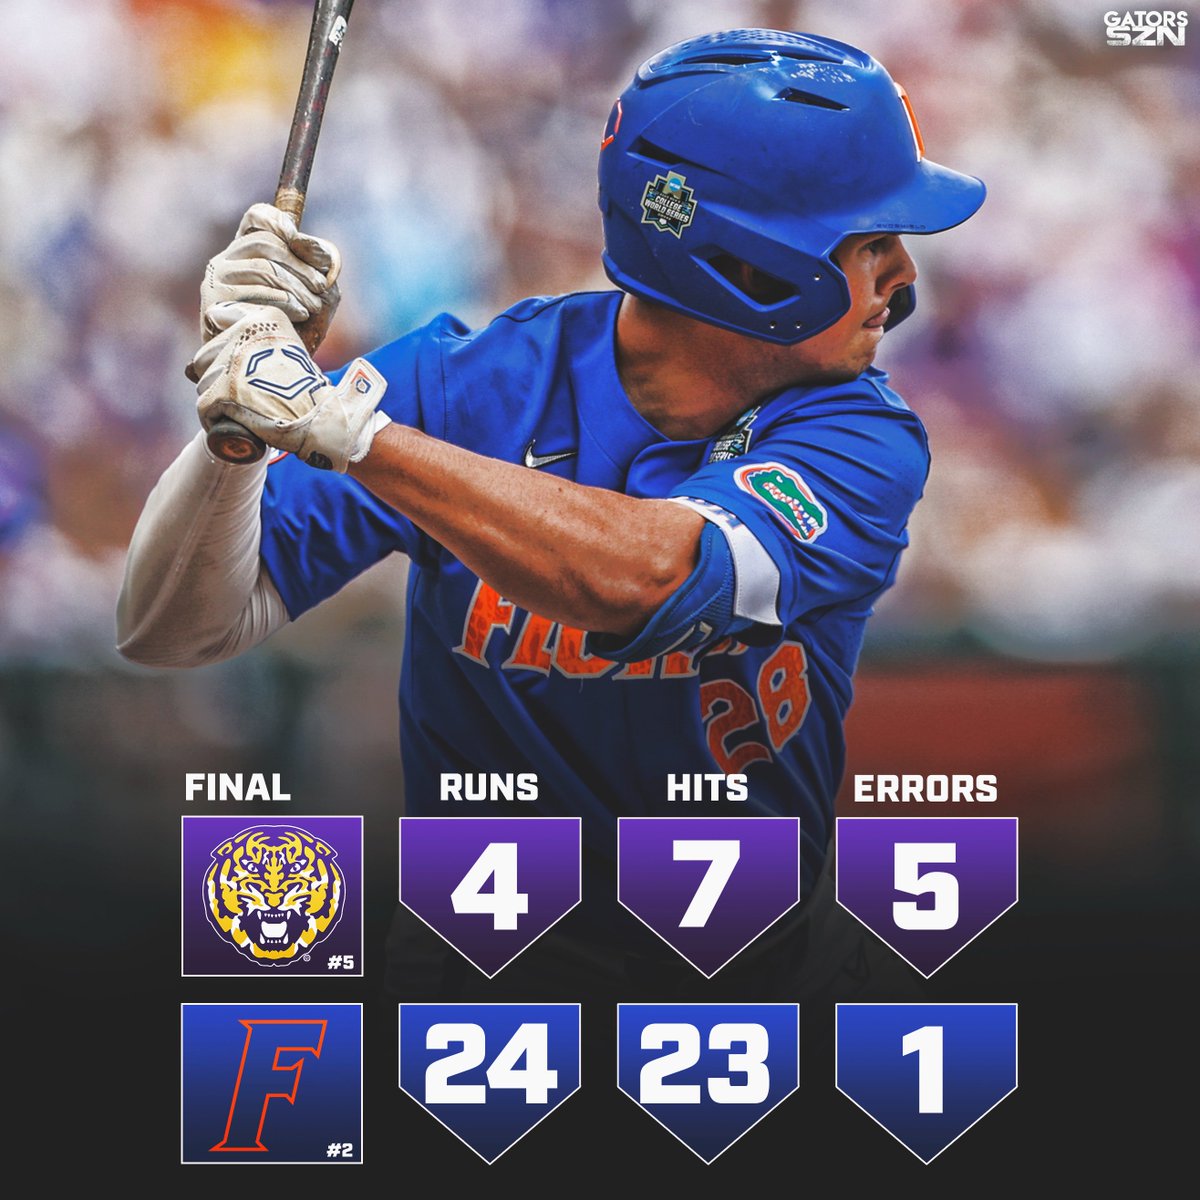 THERE WILL BE A GAME 3! THE GATORS DOMINATE THE LSU TIGERS WITH A 20 RUN WIN! 

They scored the most runs in a CWS game EVER. They also hit 6 HR’s.